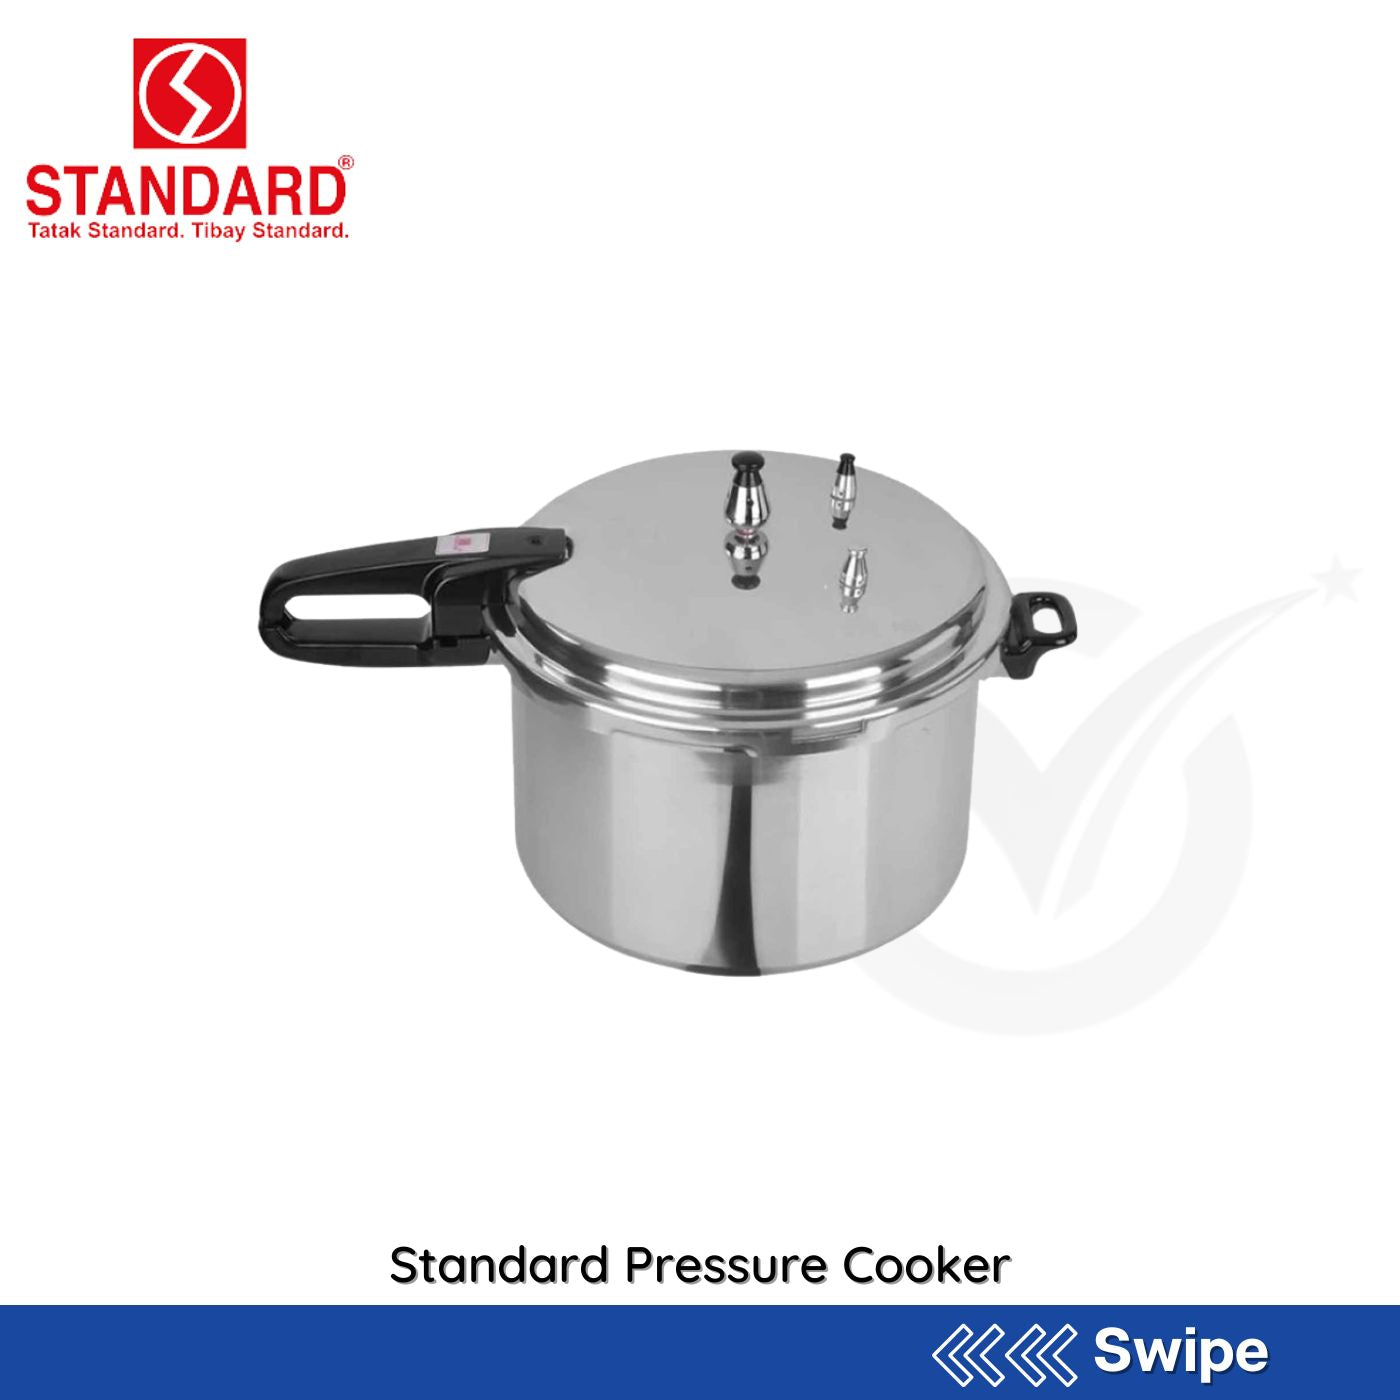 Standard Pressure Cooker - People's Choice Marketing